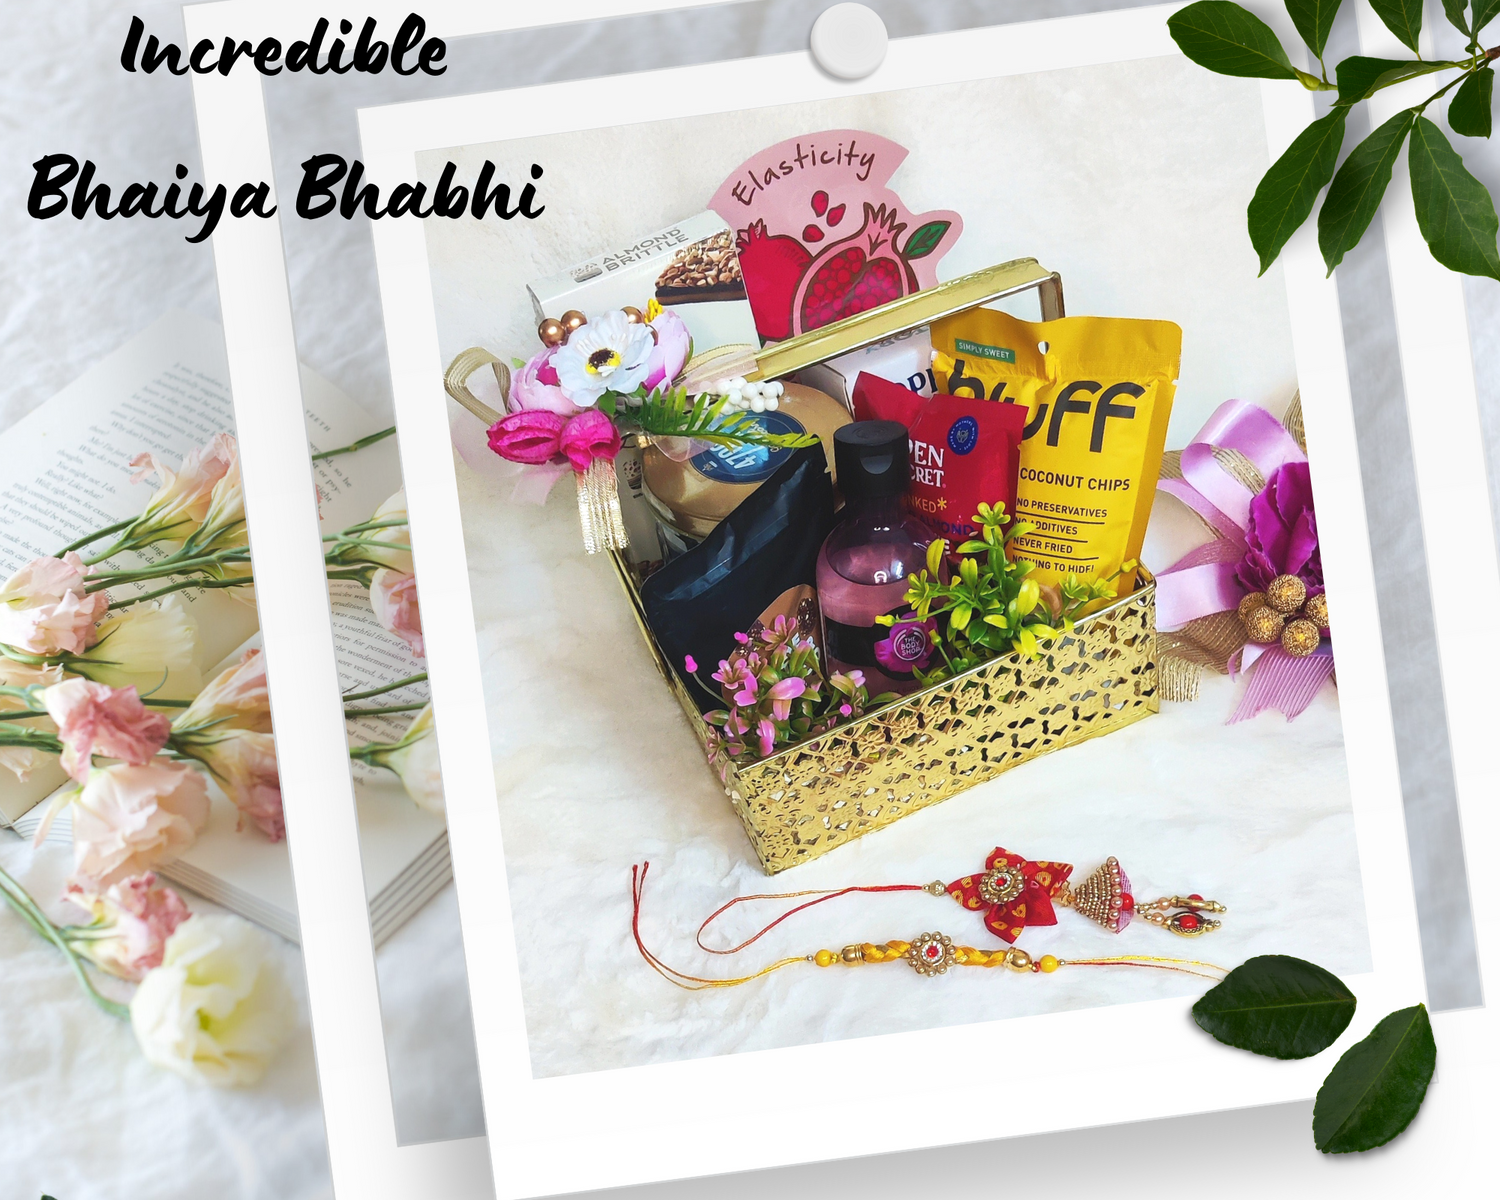 Anniversary Gifts Delivery for Bhaiya Bhabhi in Kerala at Best Price   KeralaGiftsin